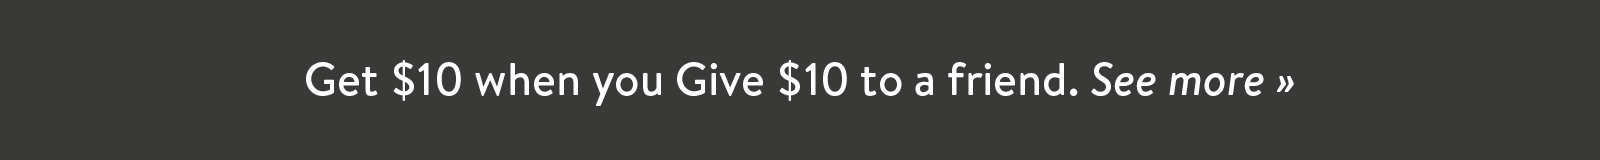 Get $10 when you Give $10 to a friend. See more ?